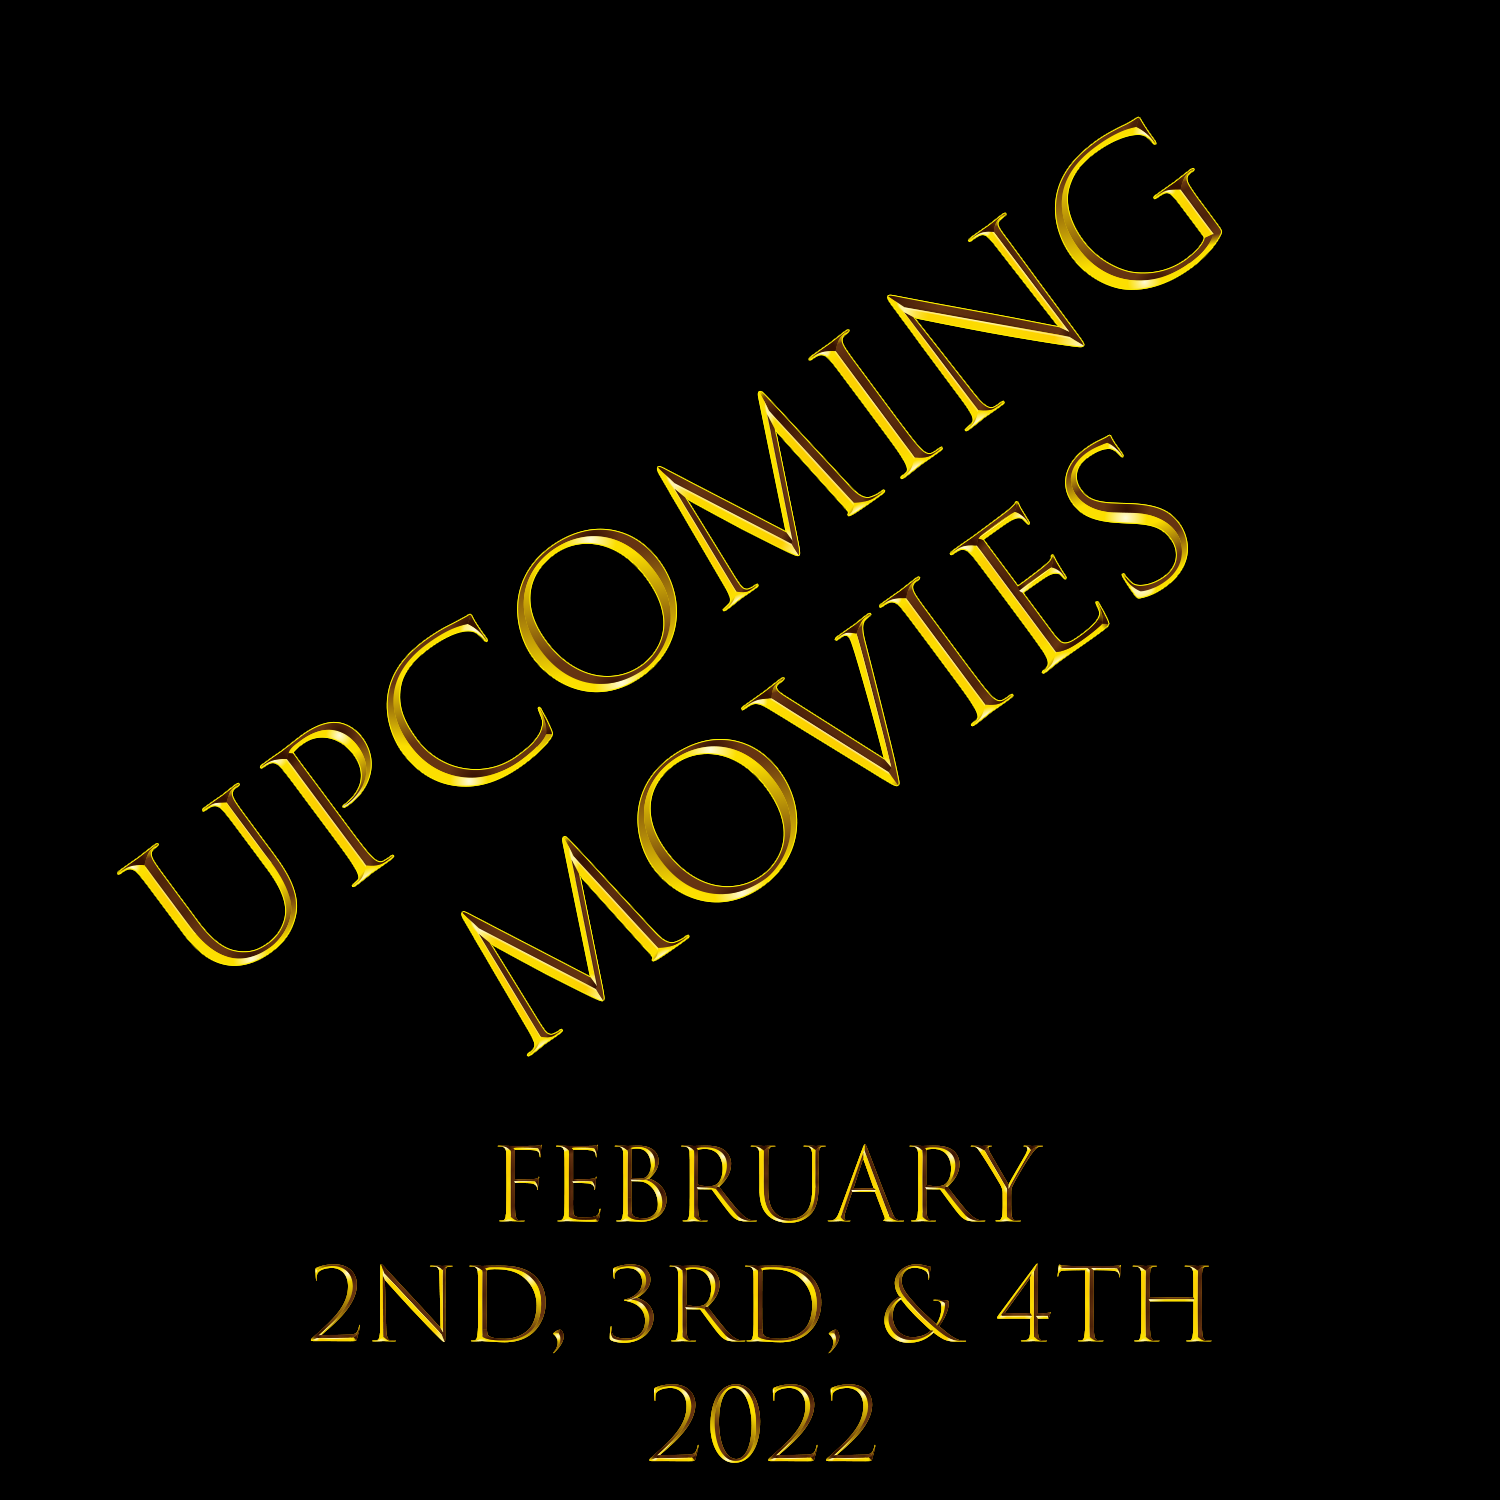 Upcoming Movies - February 3rd, 2022